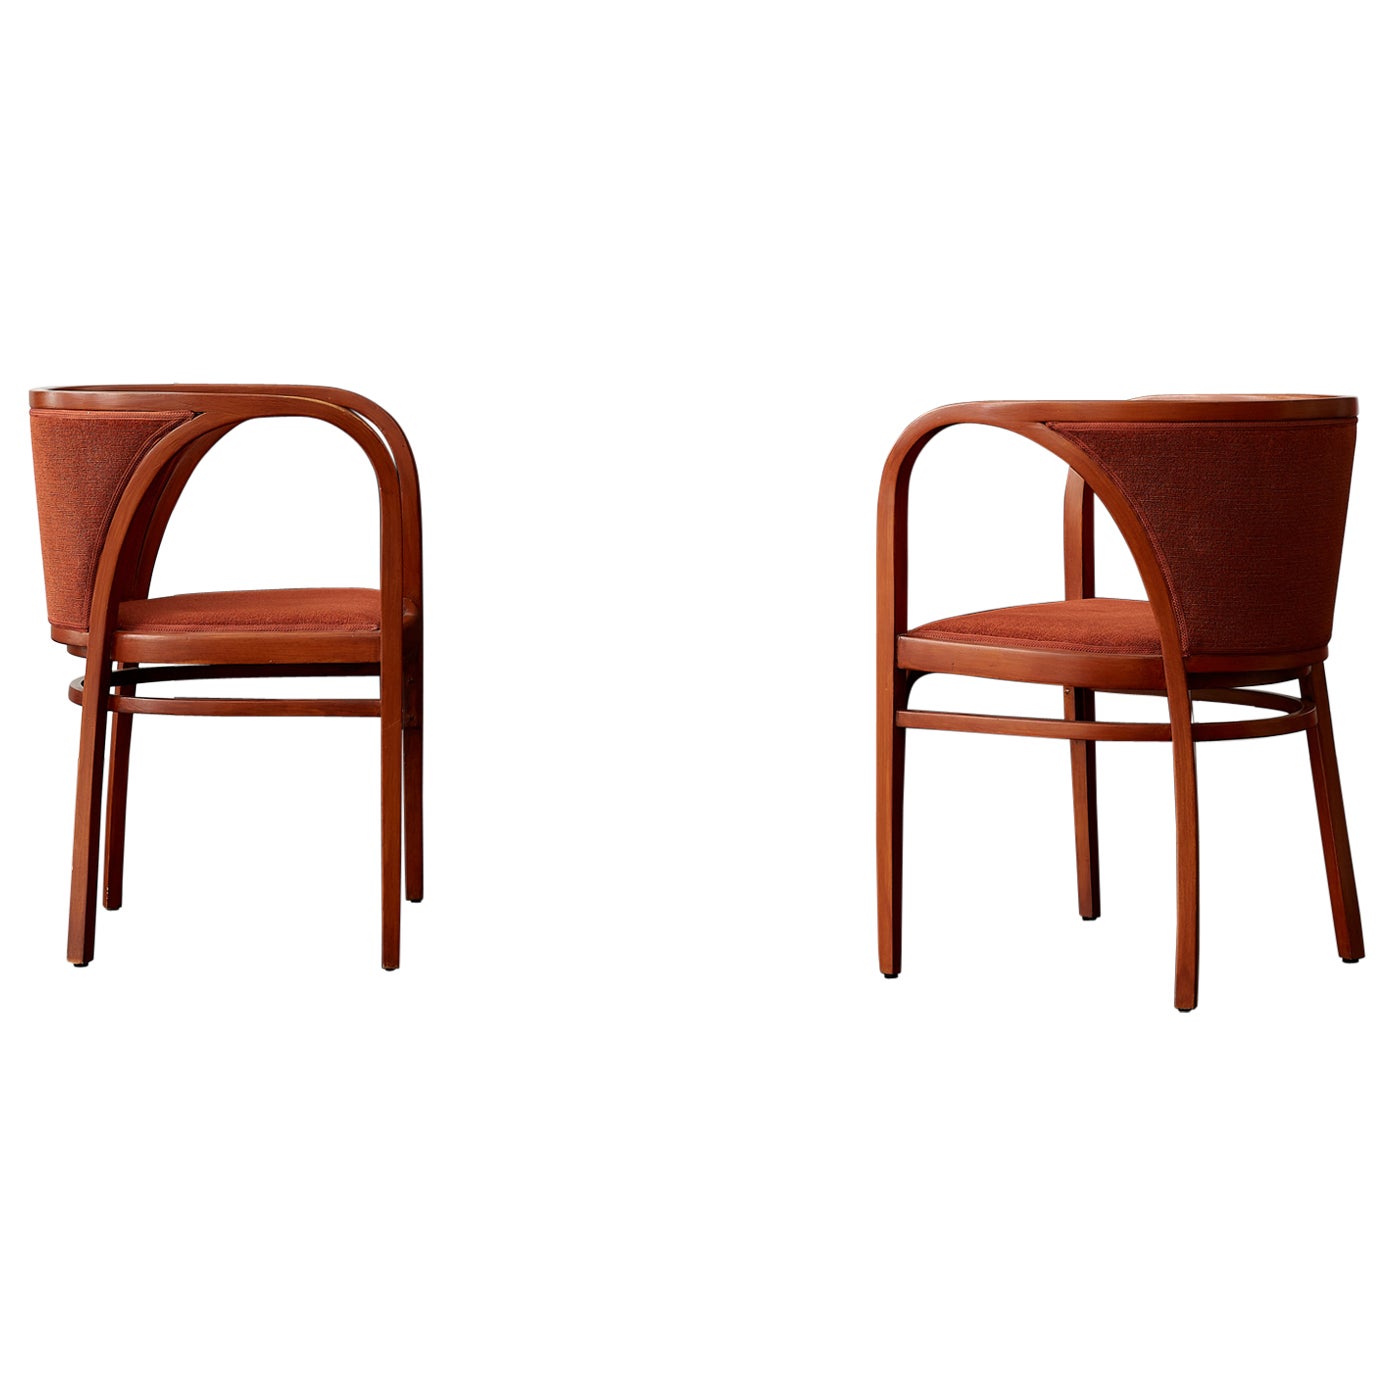 Pair of Marcel Kammerer chairs for Thonet c. 1910 